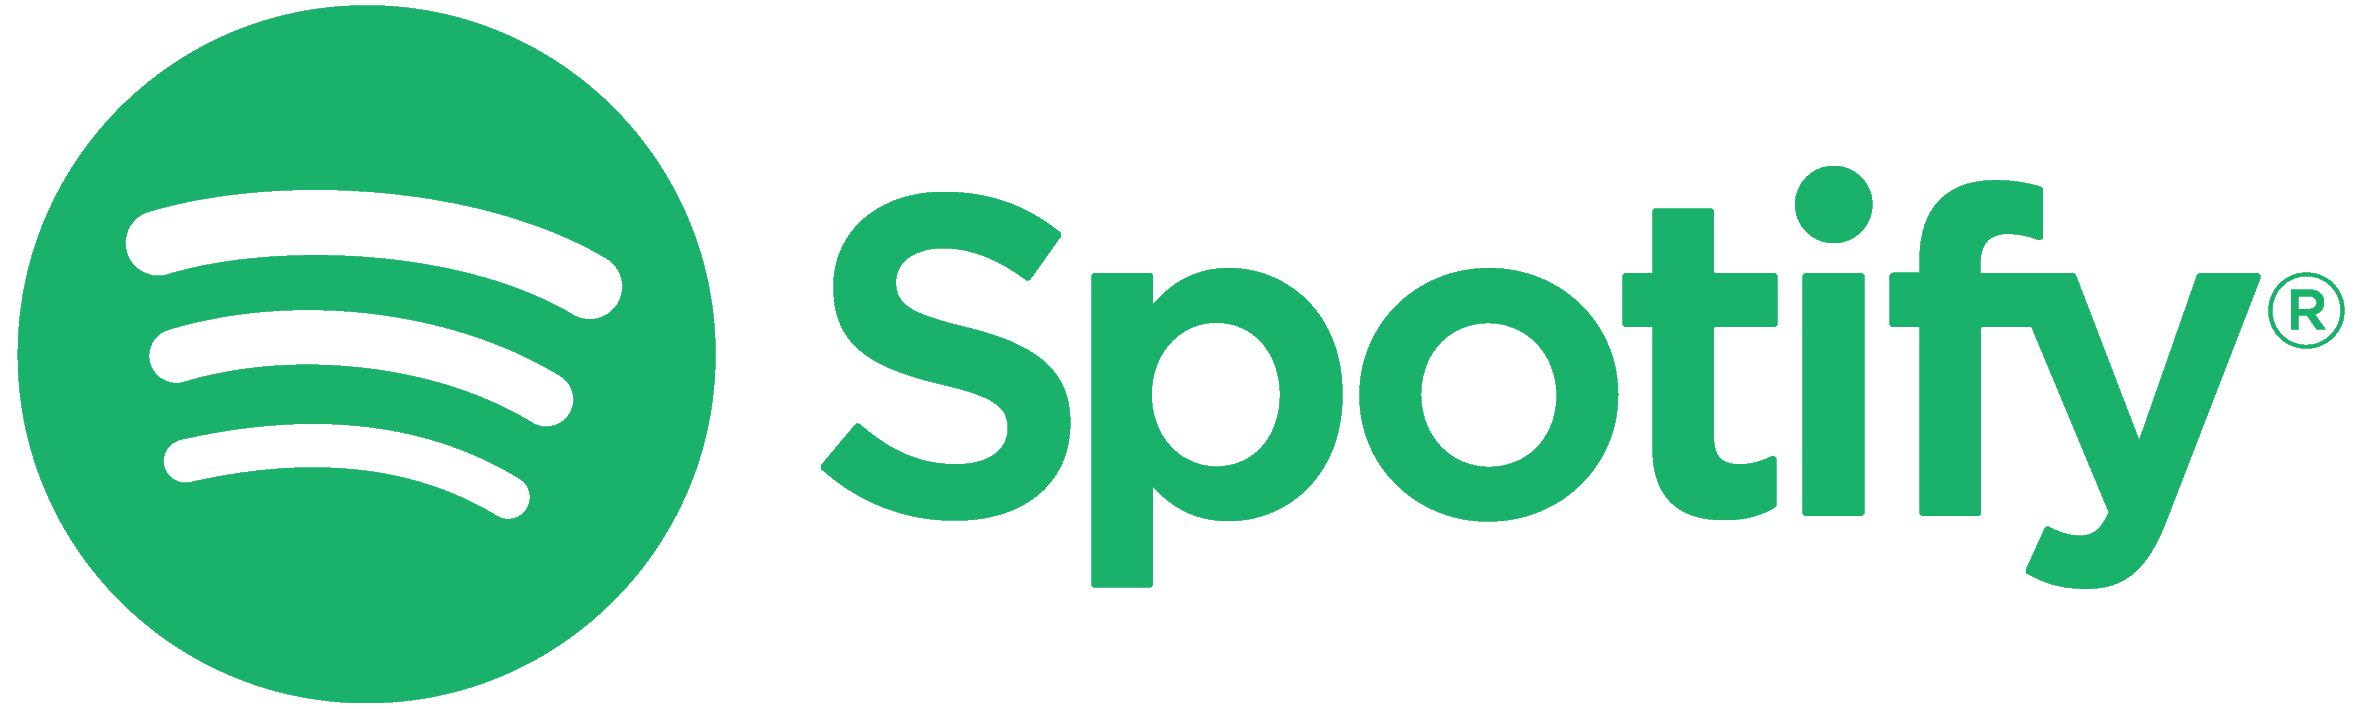 Spotify student discount logo